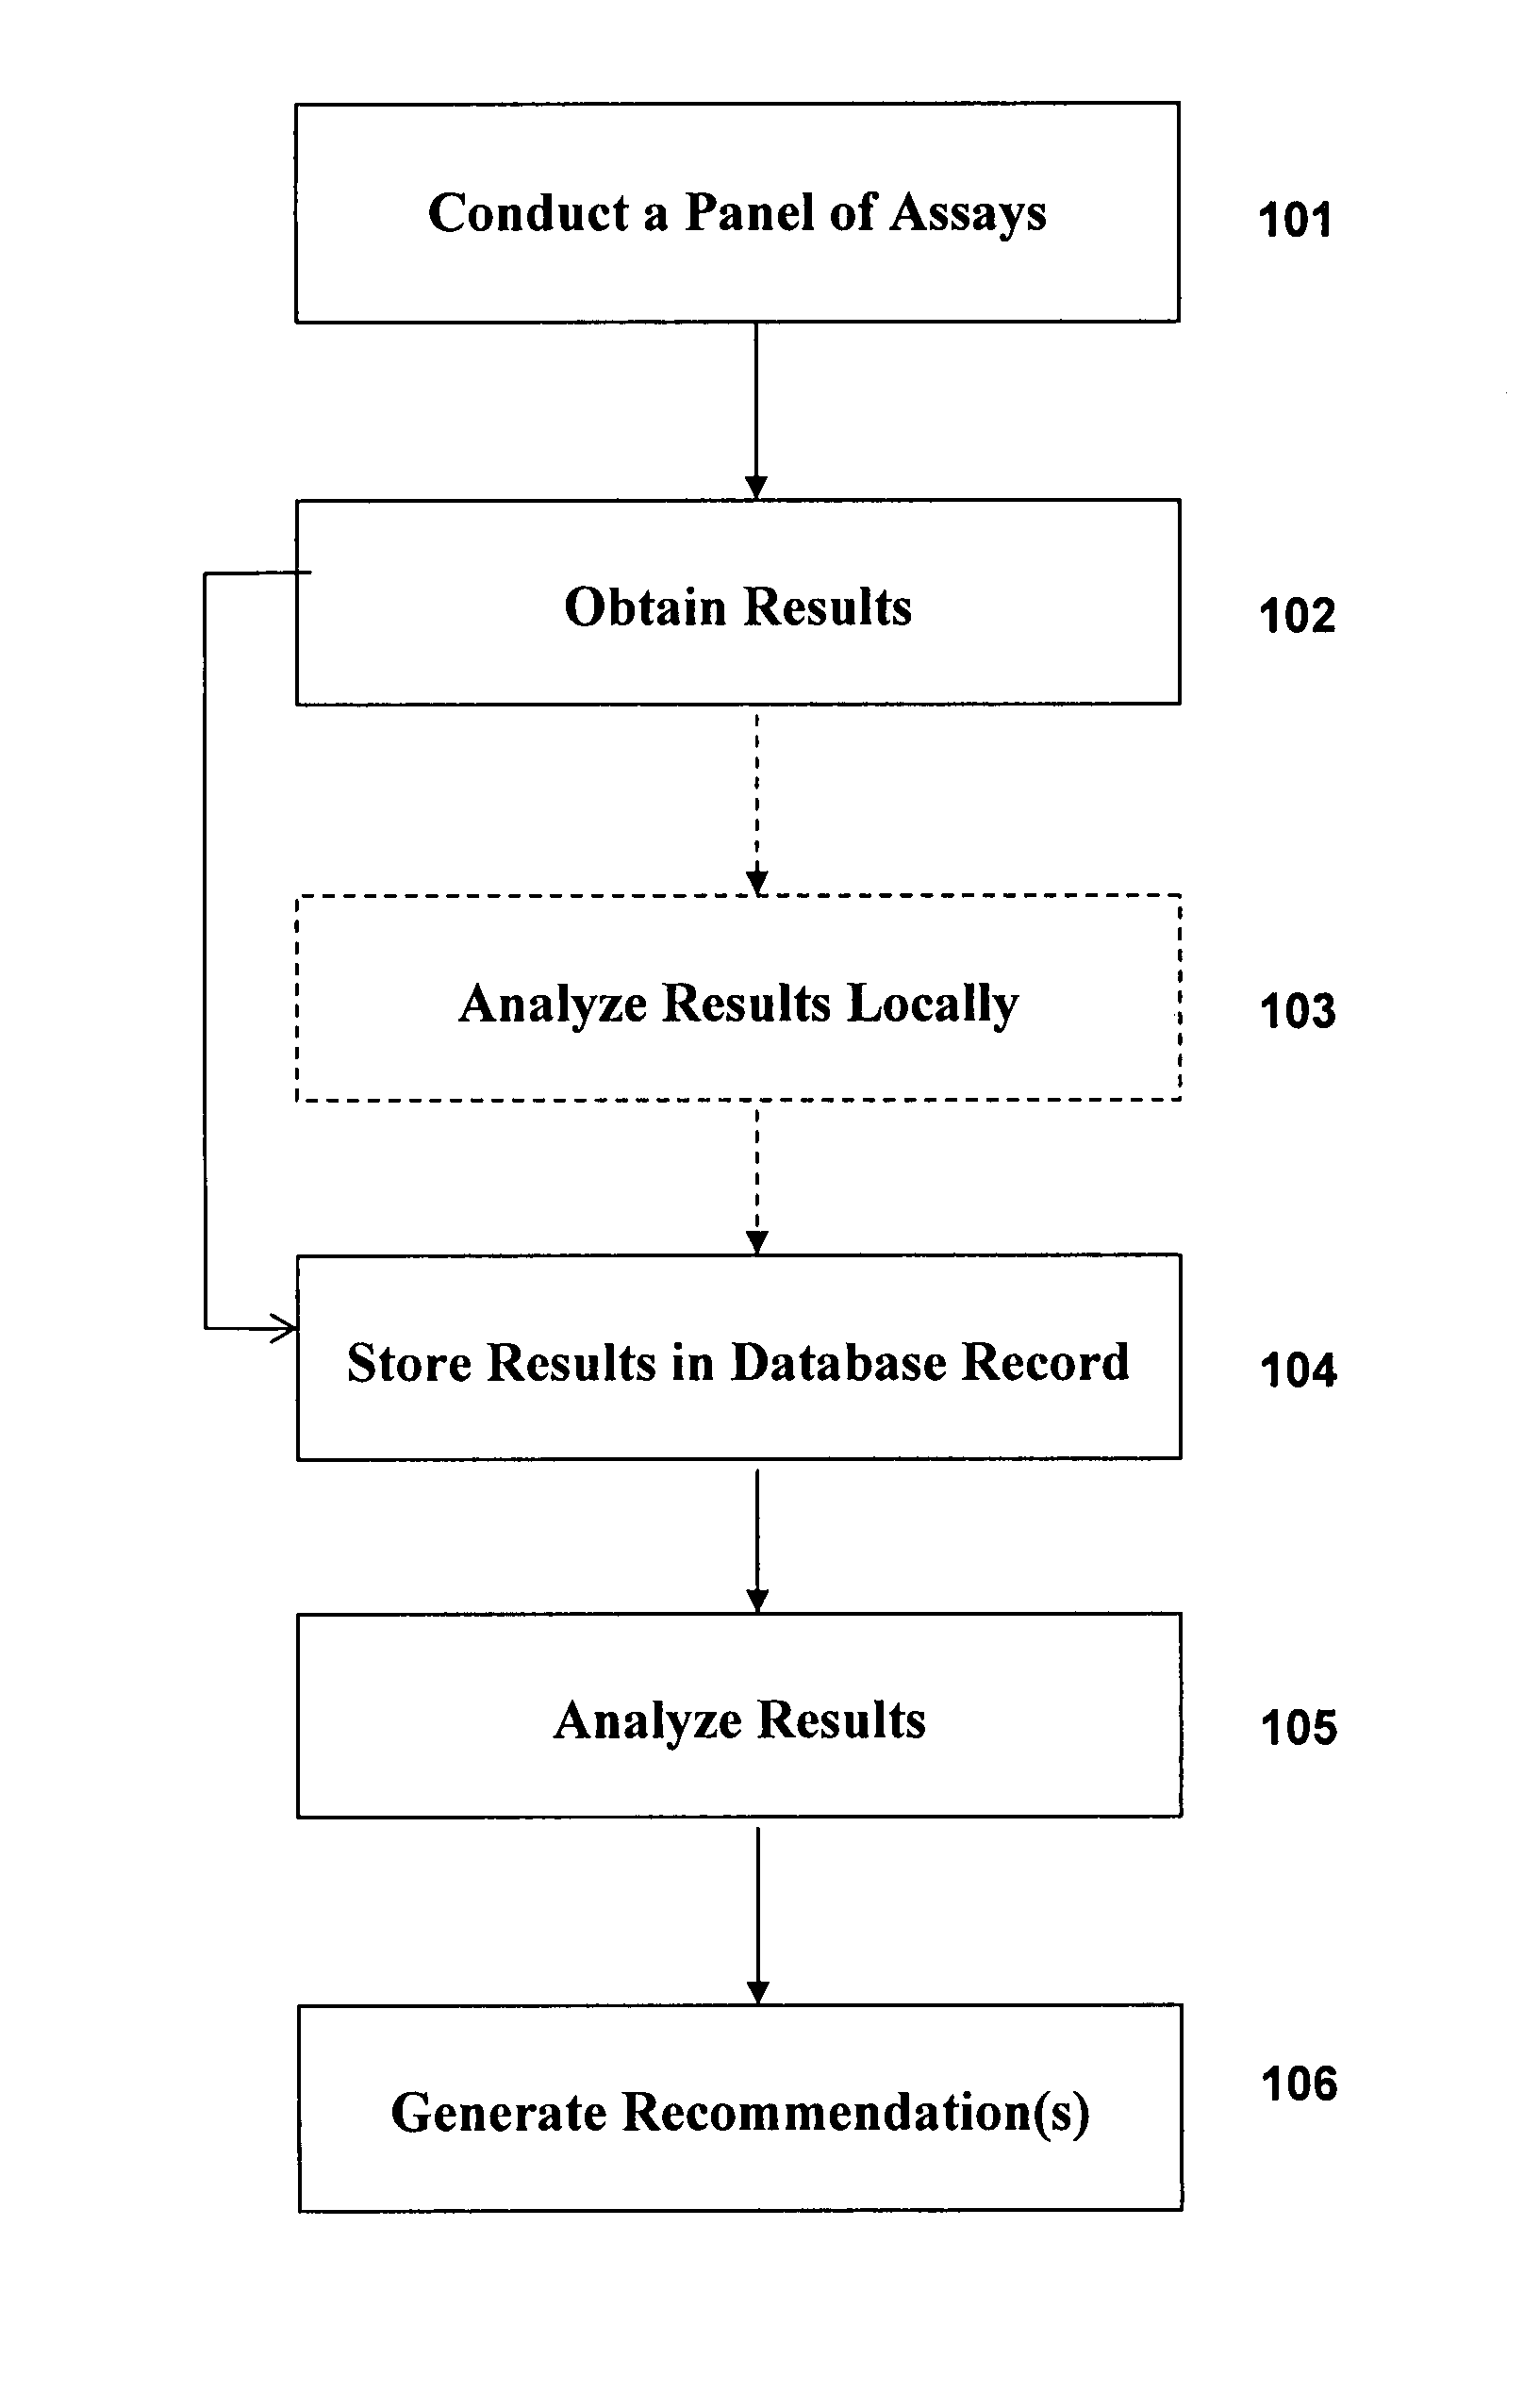 Systems and methods for obtaining, storing, processing and utilizing immunologic and other information of individuals and populations